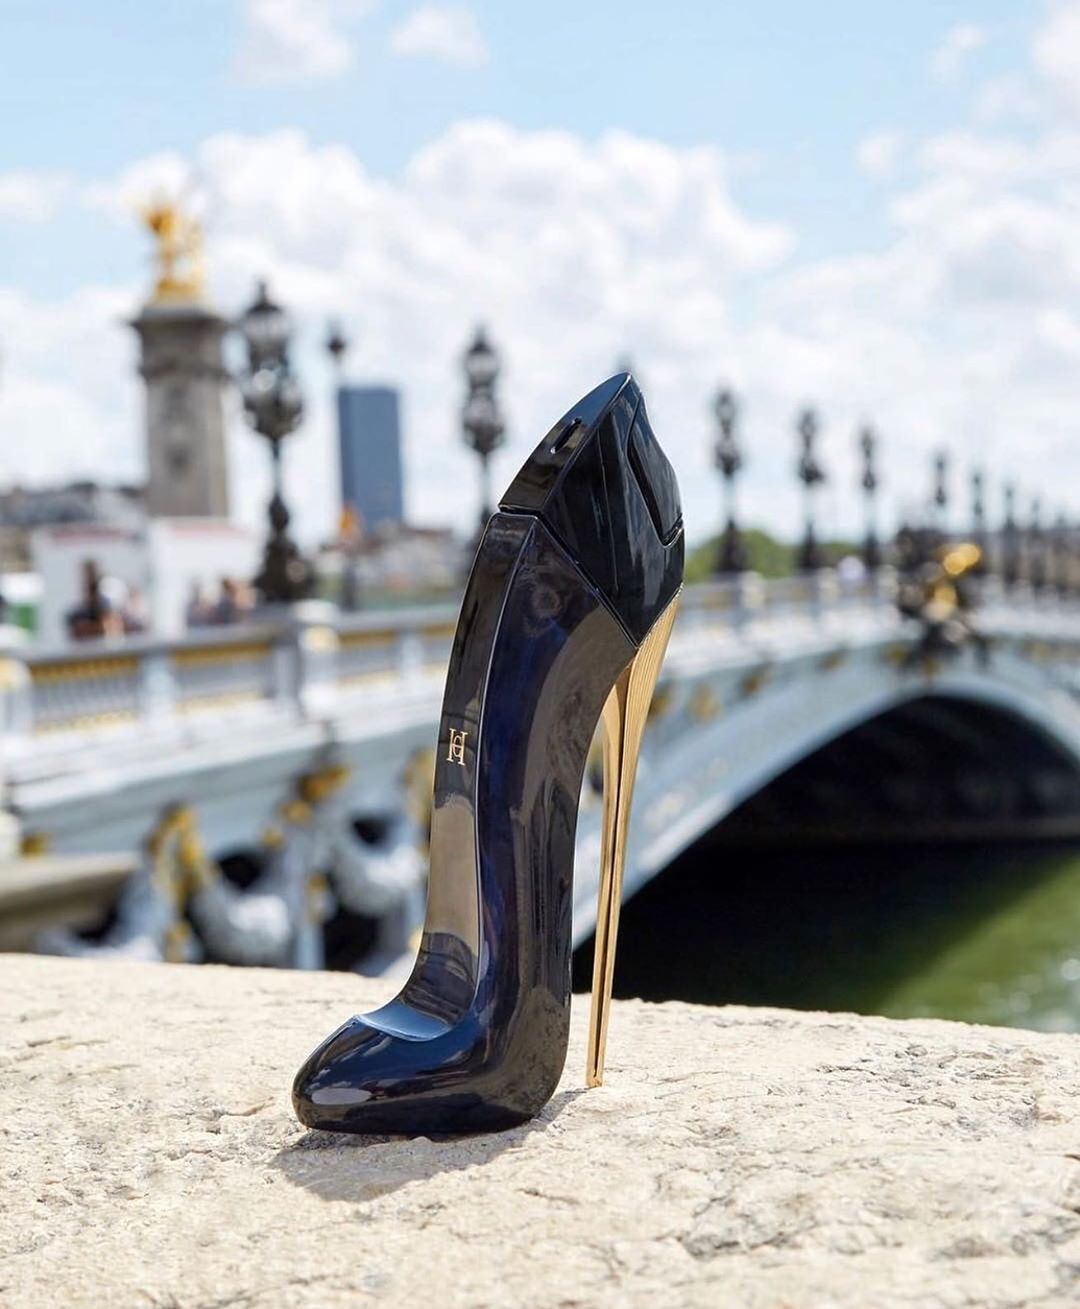 7/24 Perfumes - Give a girl the right shoes and she will conquer the world 👠 Discover Carolina Herrera Good Girl today at 724Perfumes.
https://bit.ly/2Lvly58

#724Perfumes #Woman #Men #perfumes #offer...